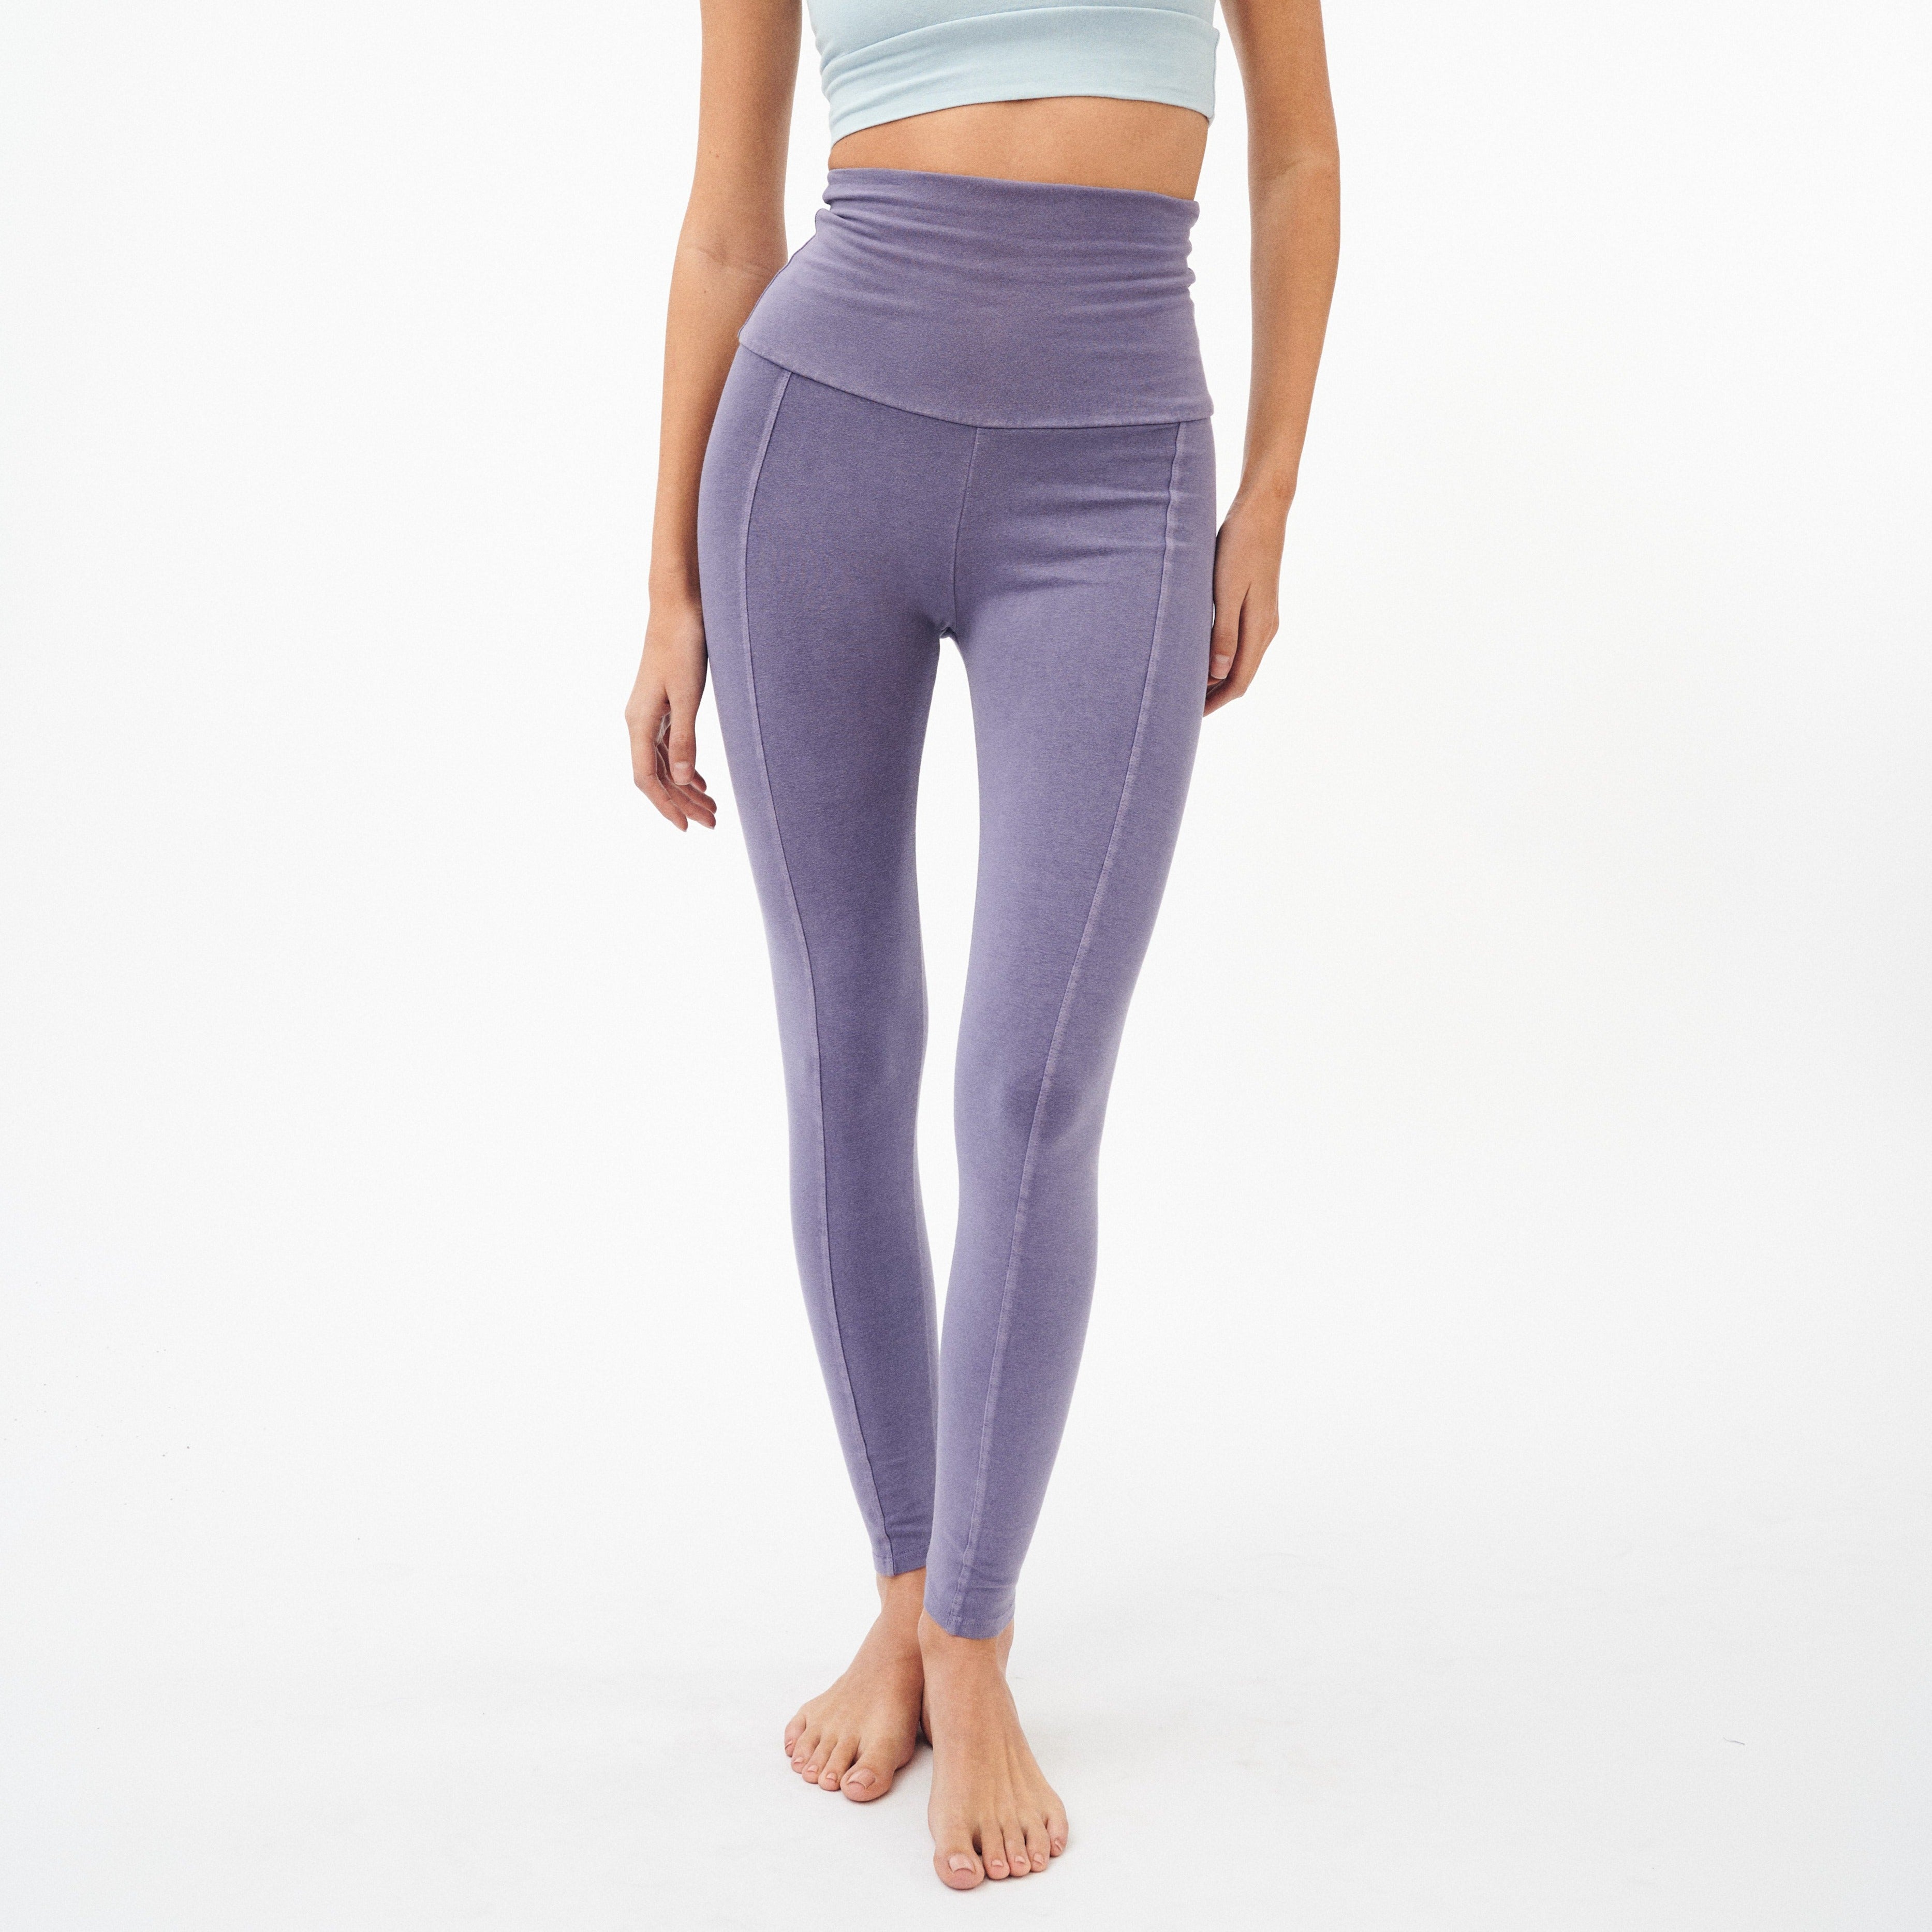 Women's leggings with a gathered seam   - Women's and men's  clothing and accessories at affordable prices.